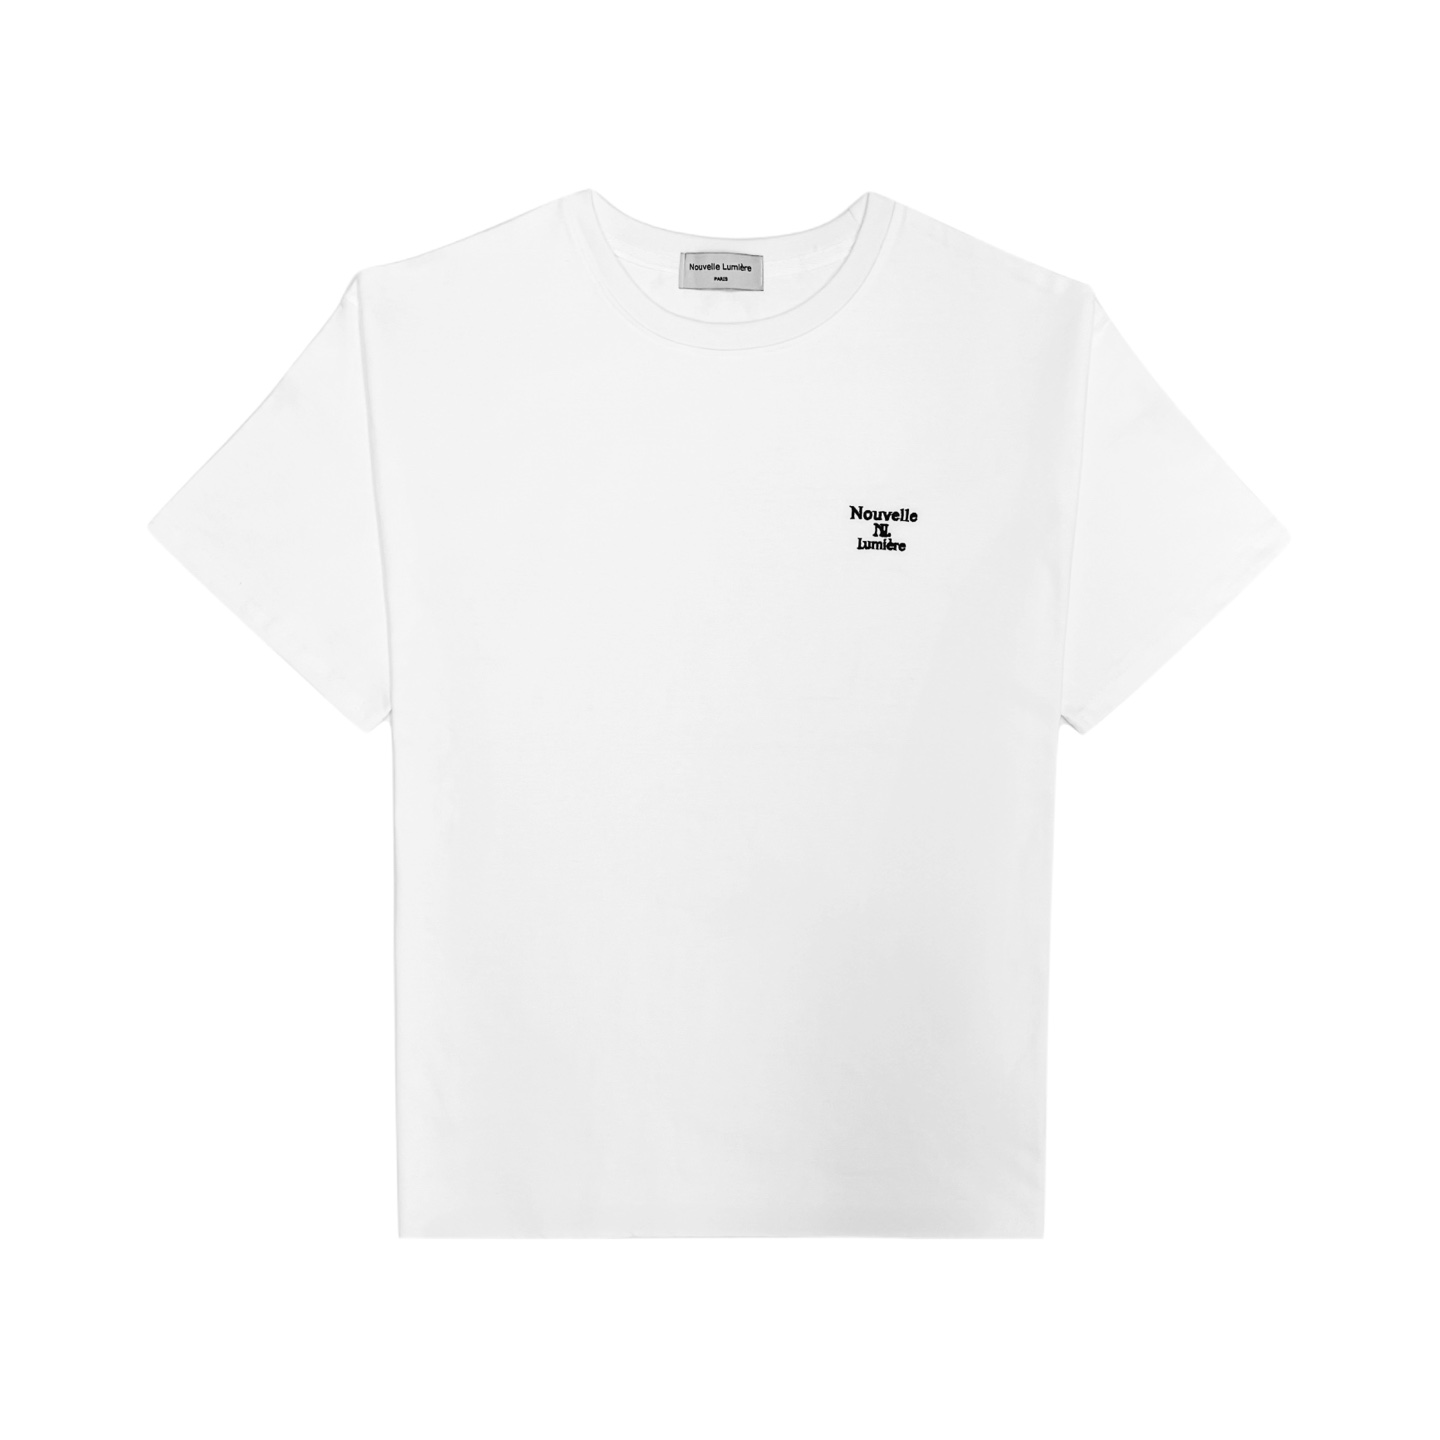 Nubelmiere Classic Embroidery Logo White Short-Sleeved T-Shirt